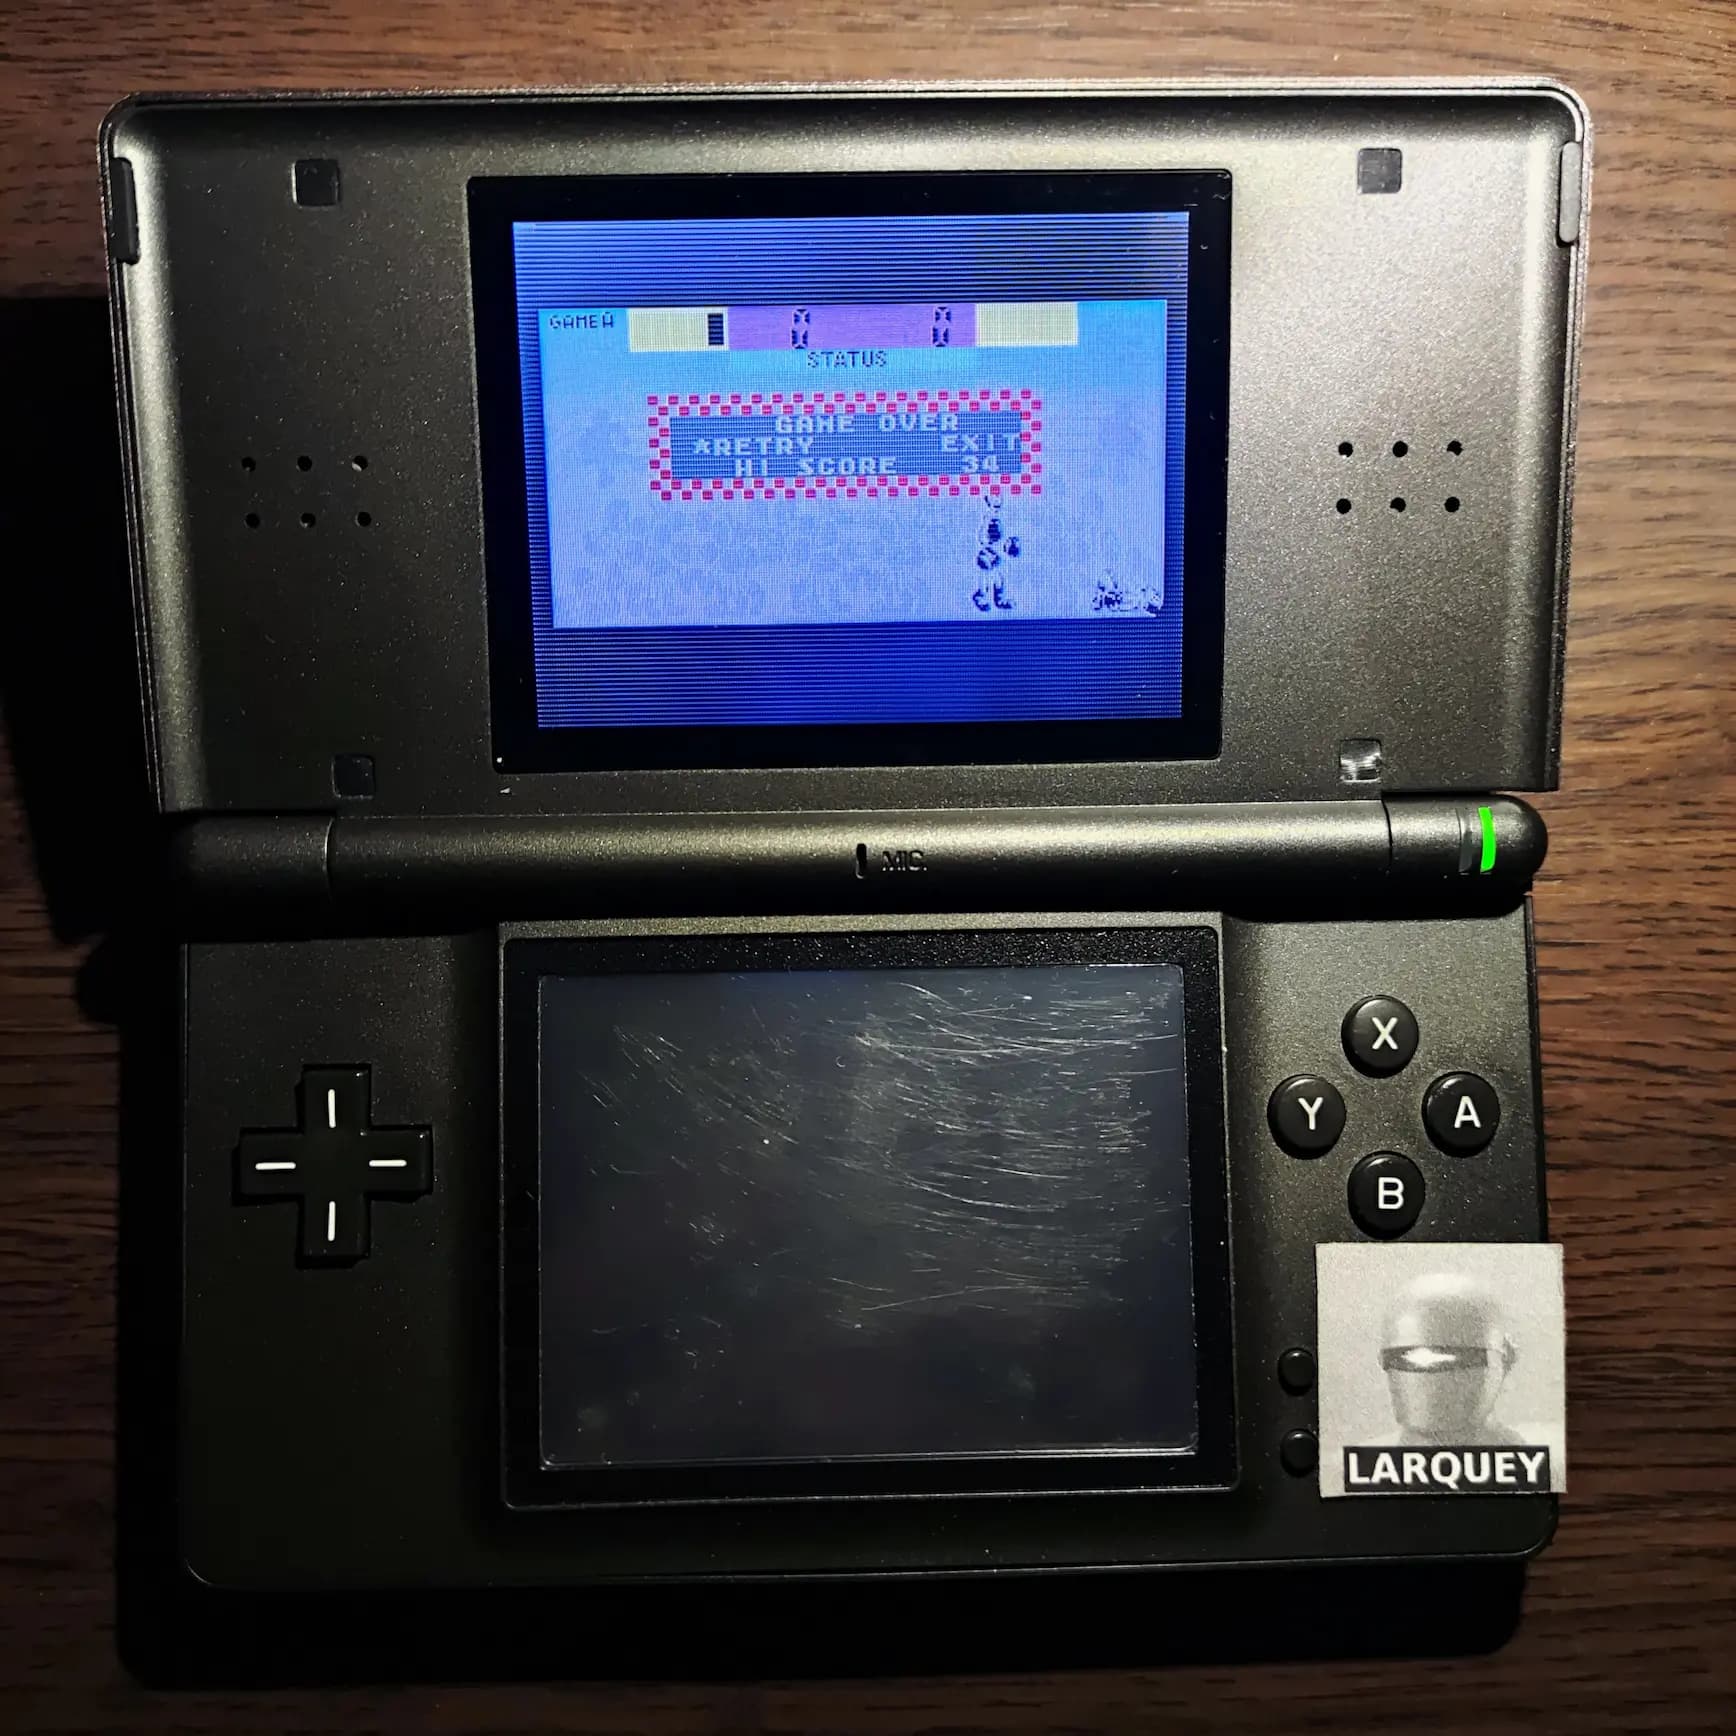 Larquey: Game & Watch Gallery 4: Boxing [Classic: Game A] (GBA) 34 points on 2022-07-31 01:15:13